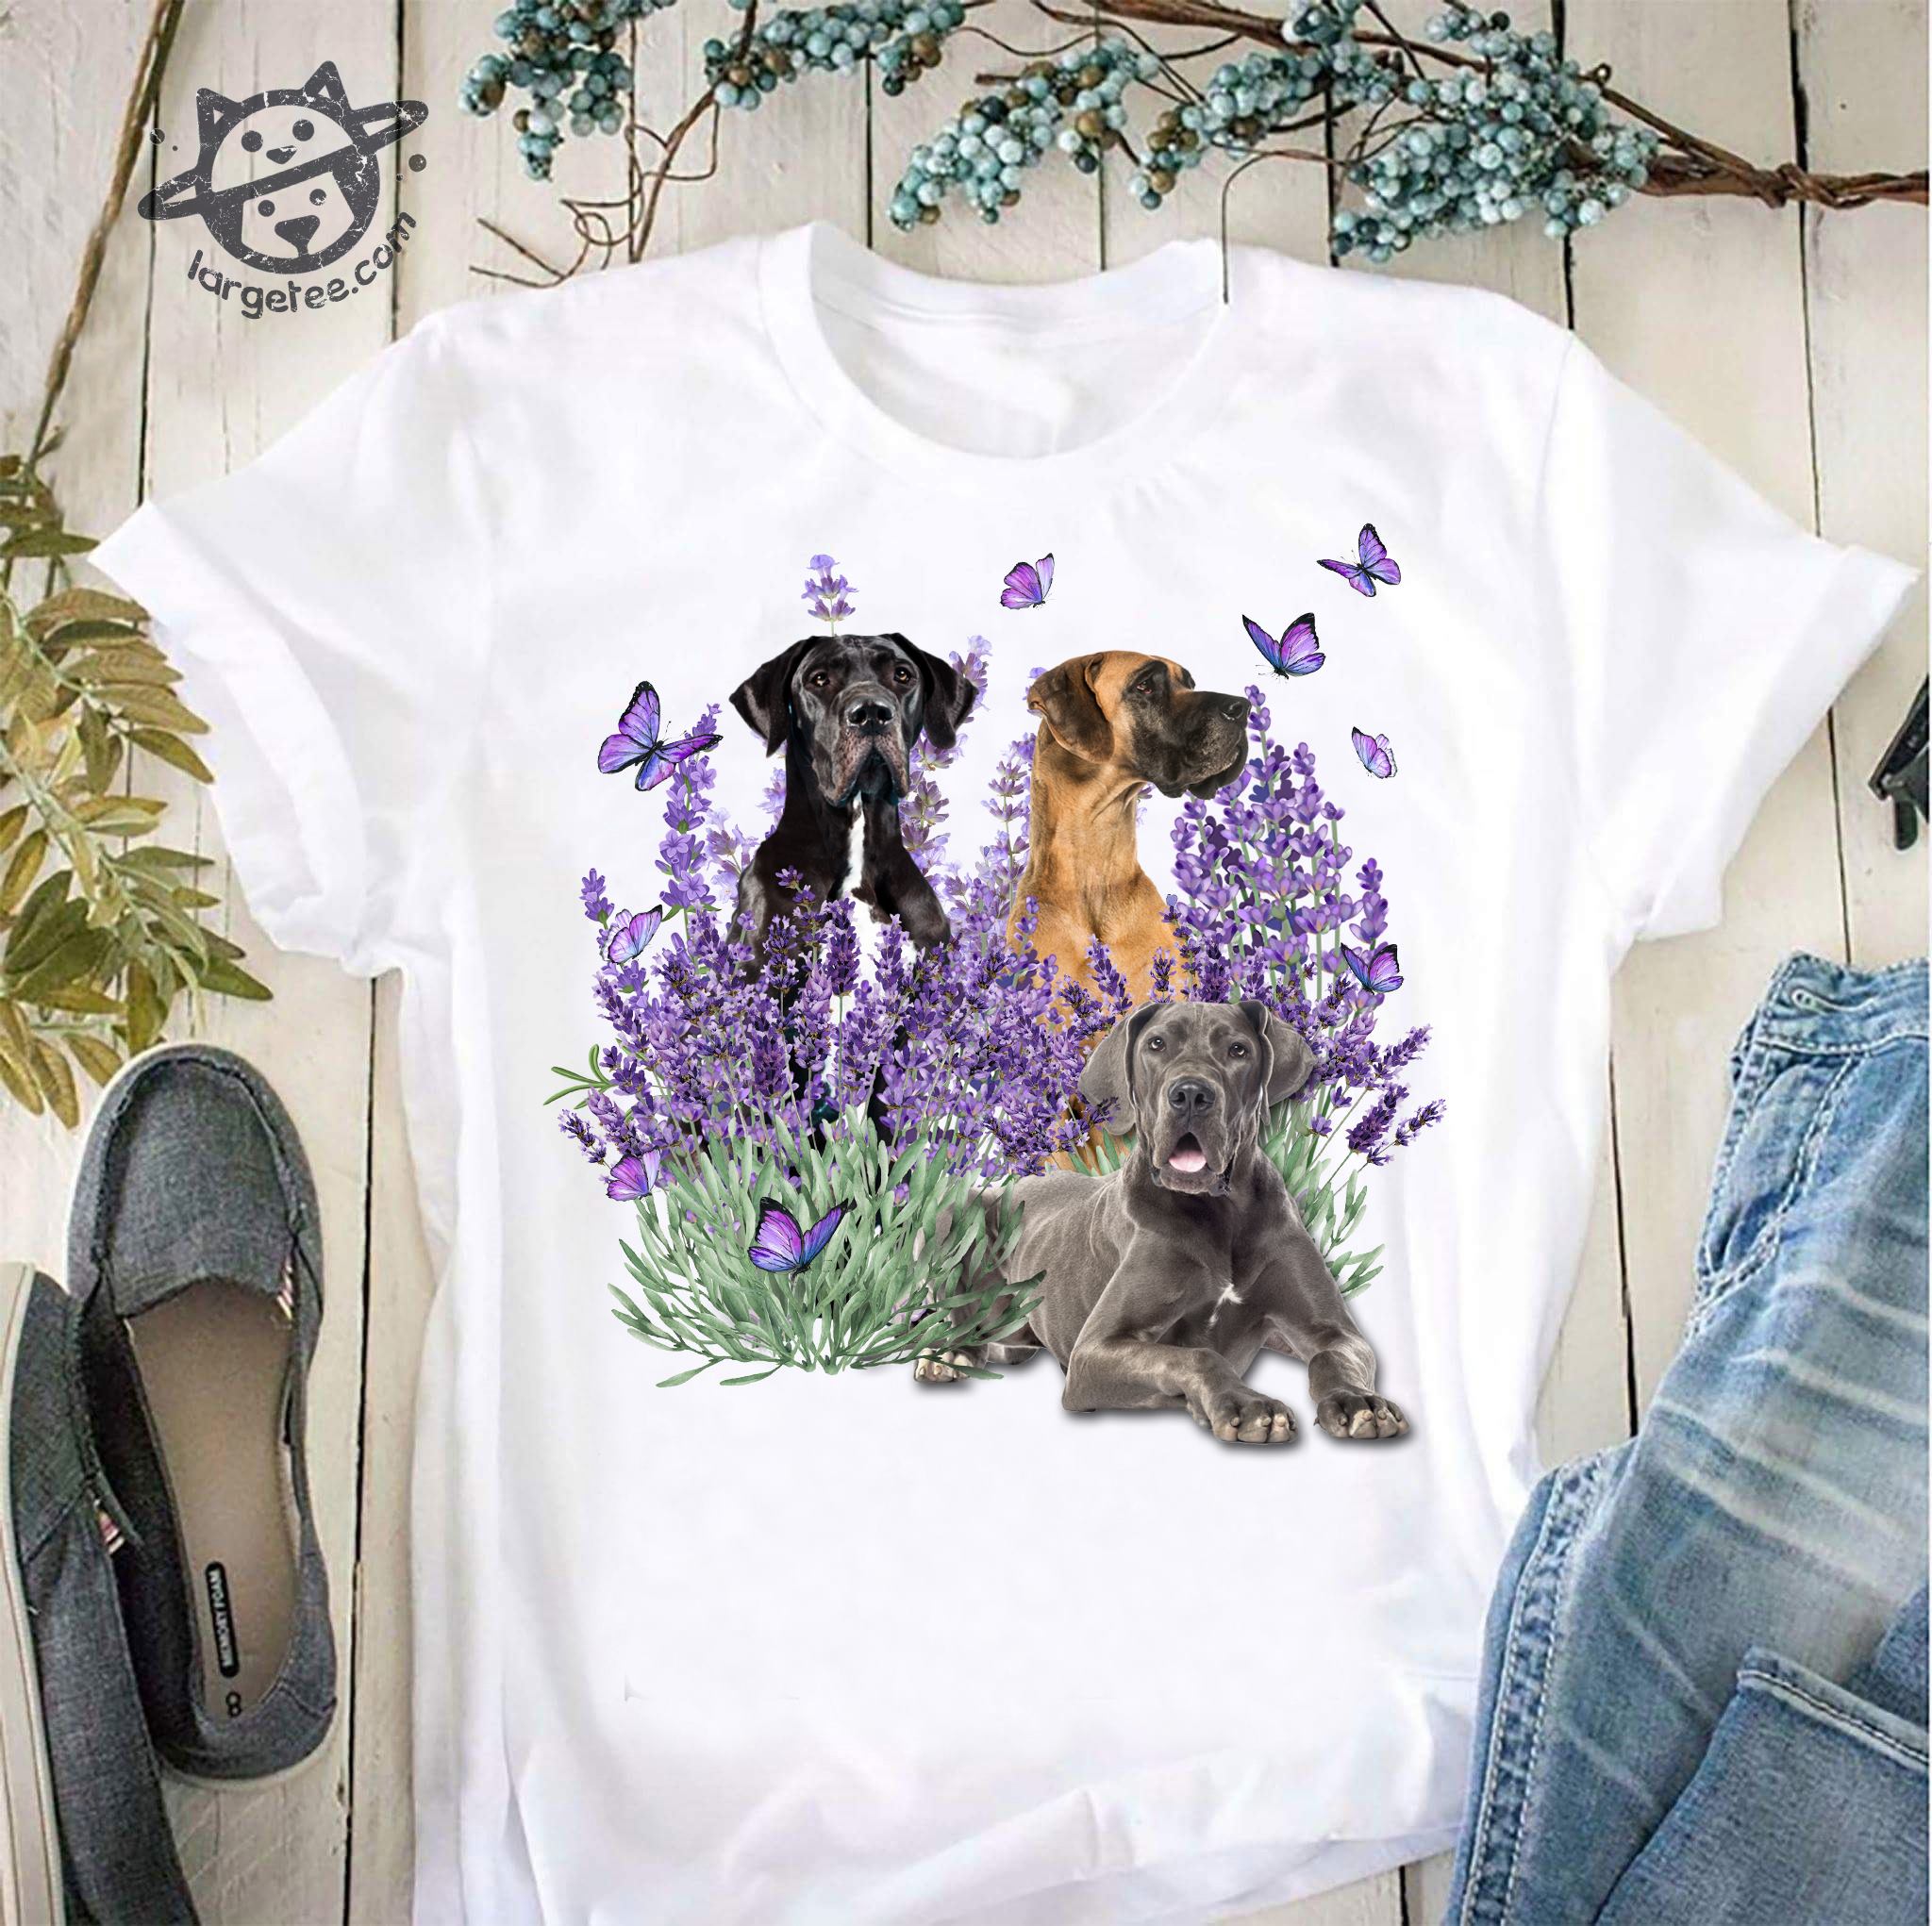 Great dance dog and butterflies - Dog lover